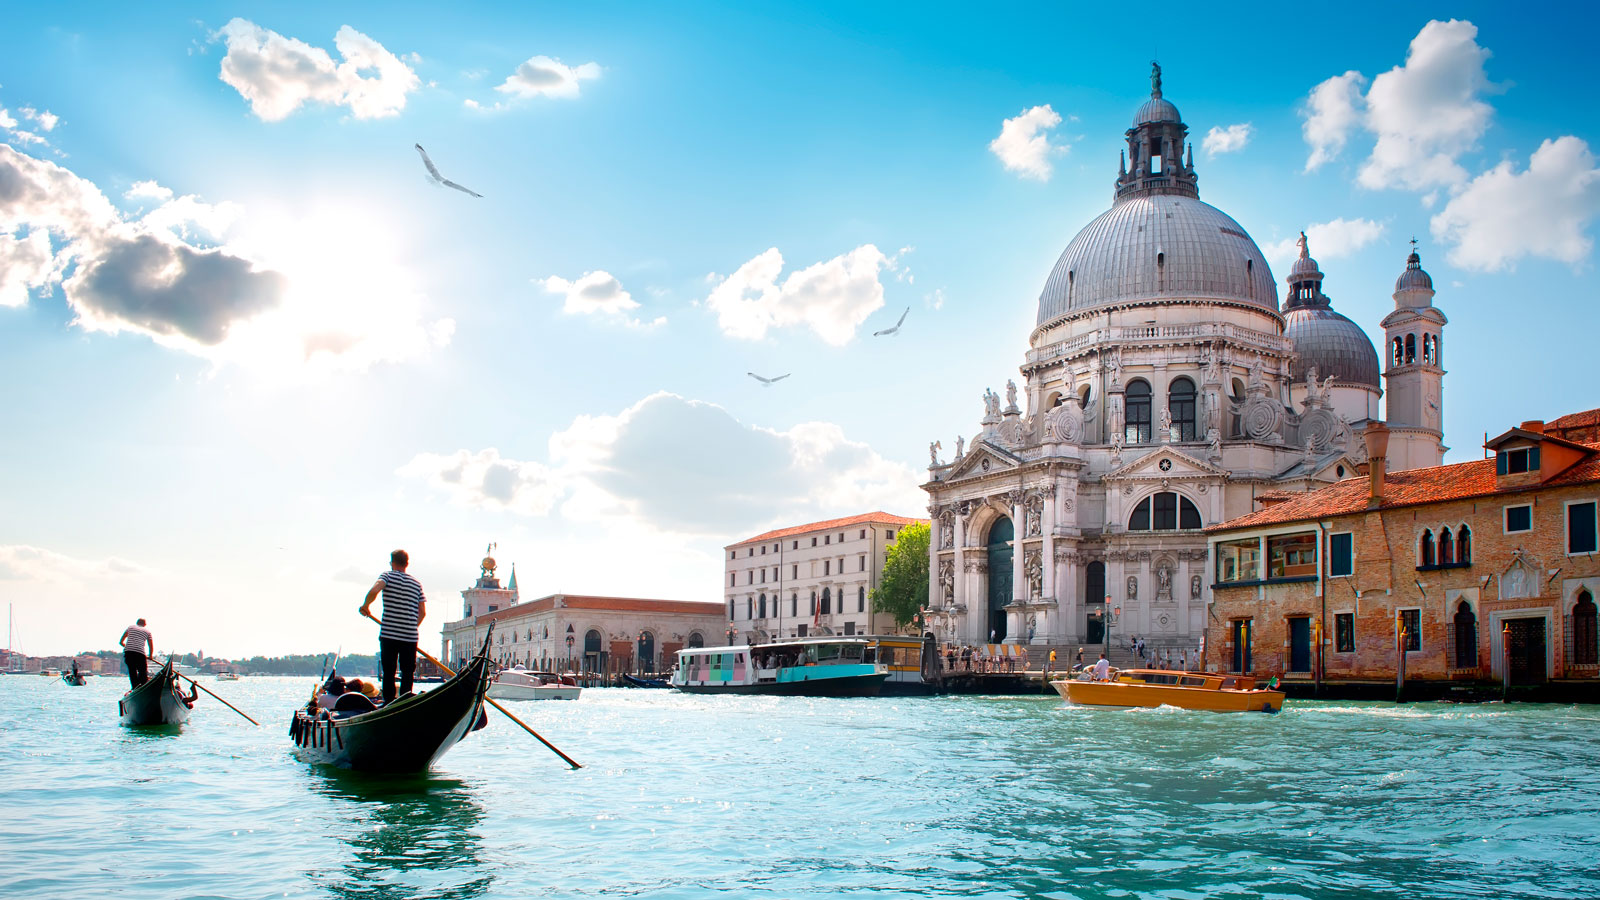 The famous Venice Grand Canal